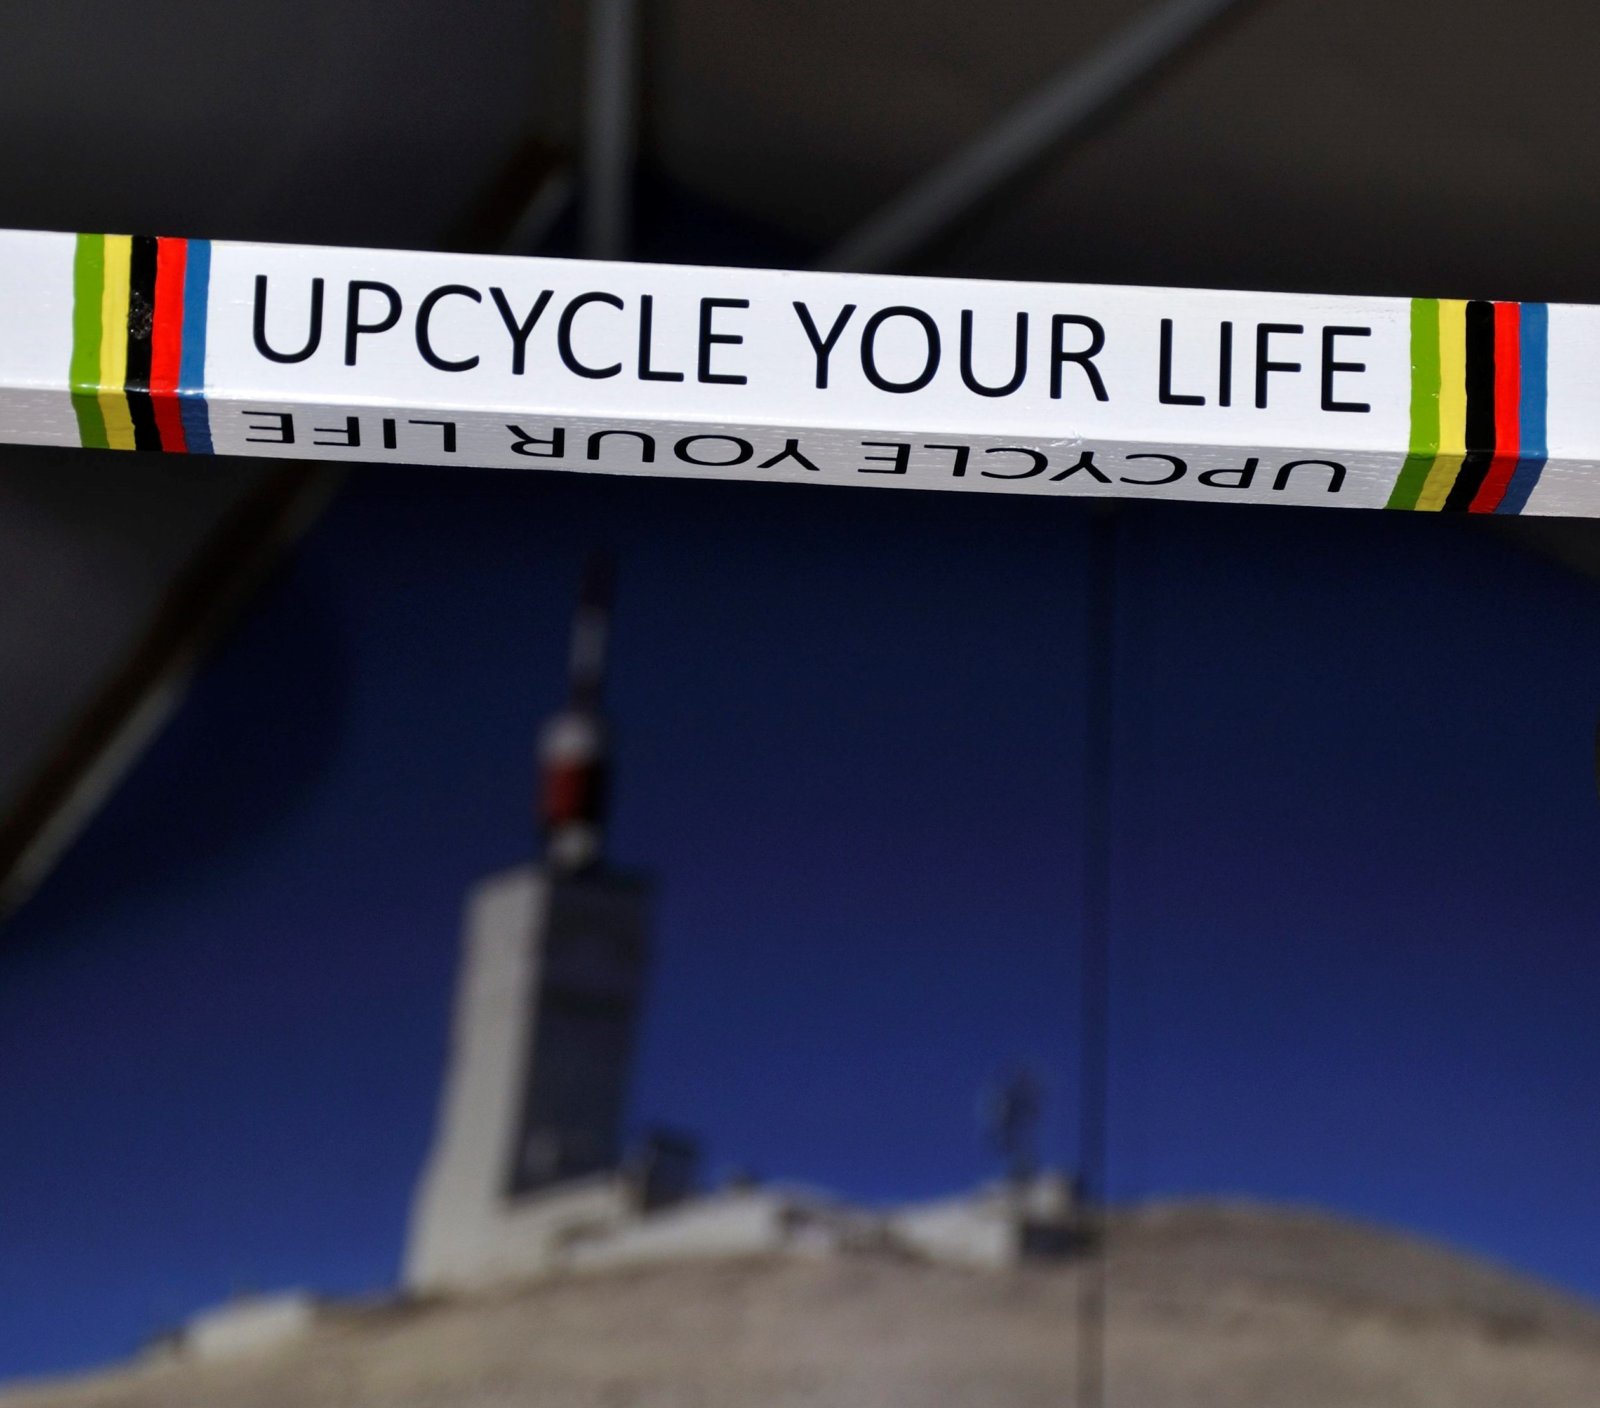 Upcycle Your Life Art & Design Ventoux